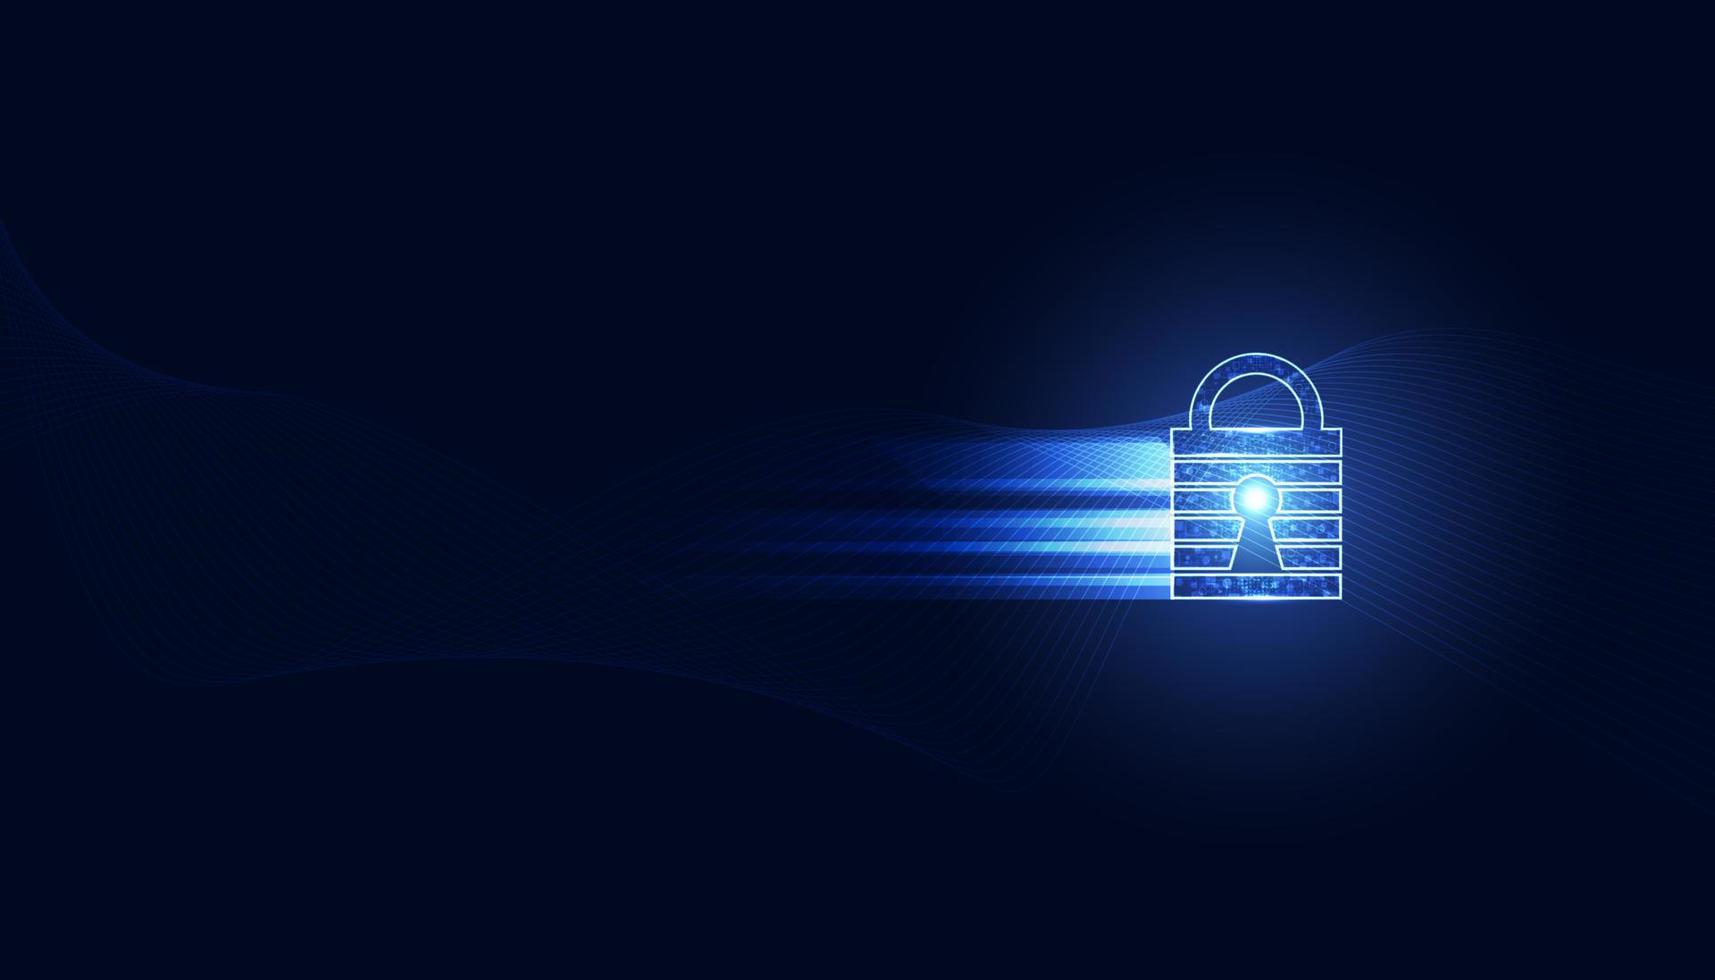 Abstract technology cyber security privacy information network concept padlock protection digital network internet link on hi tech blue future background vector